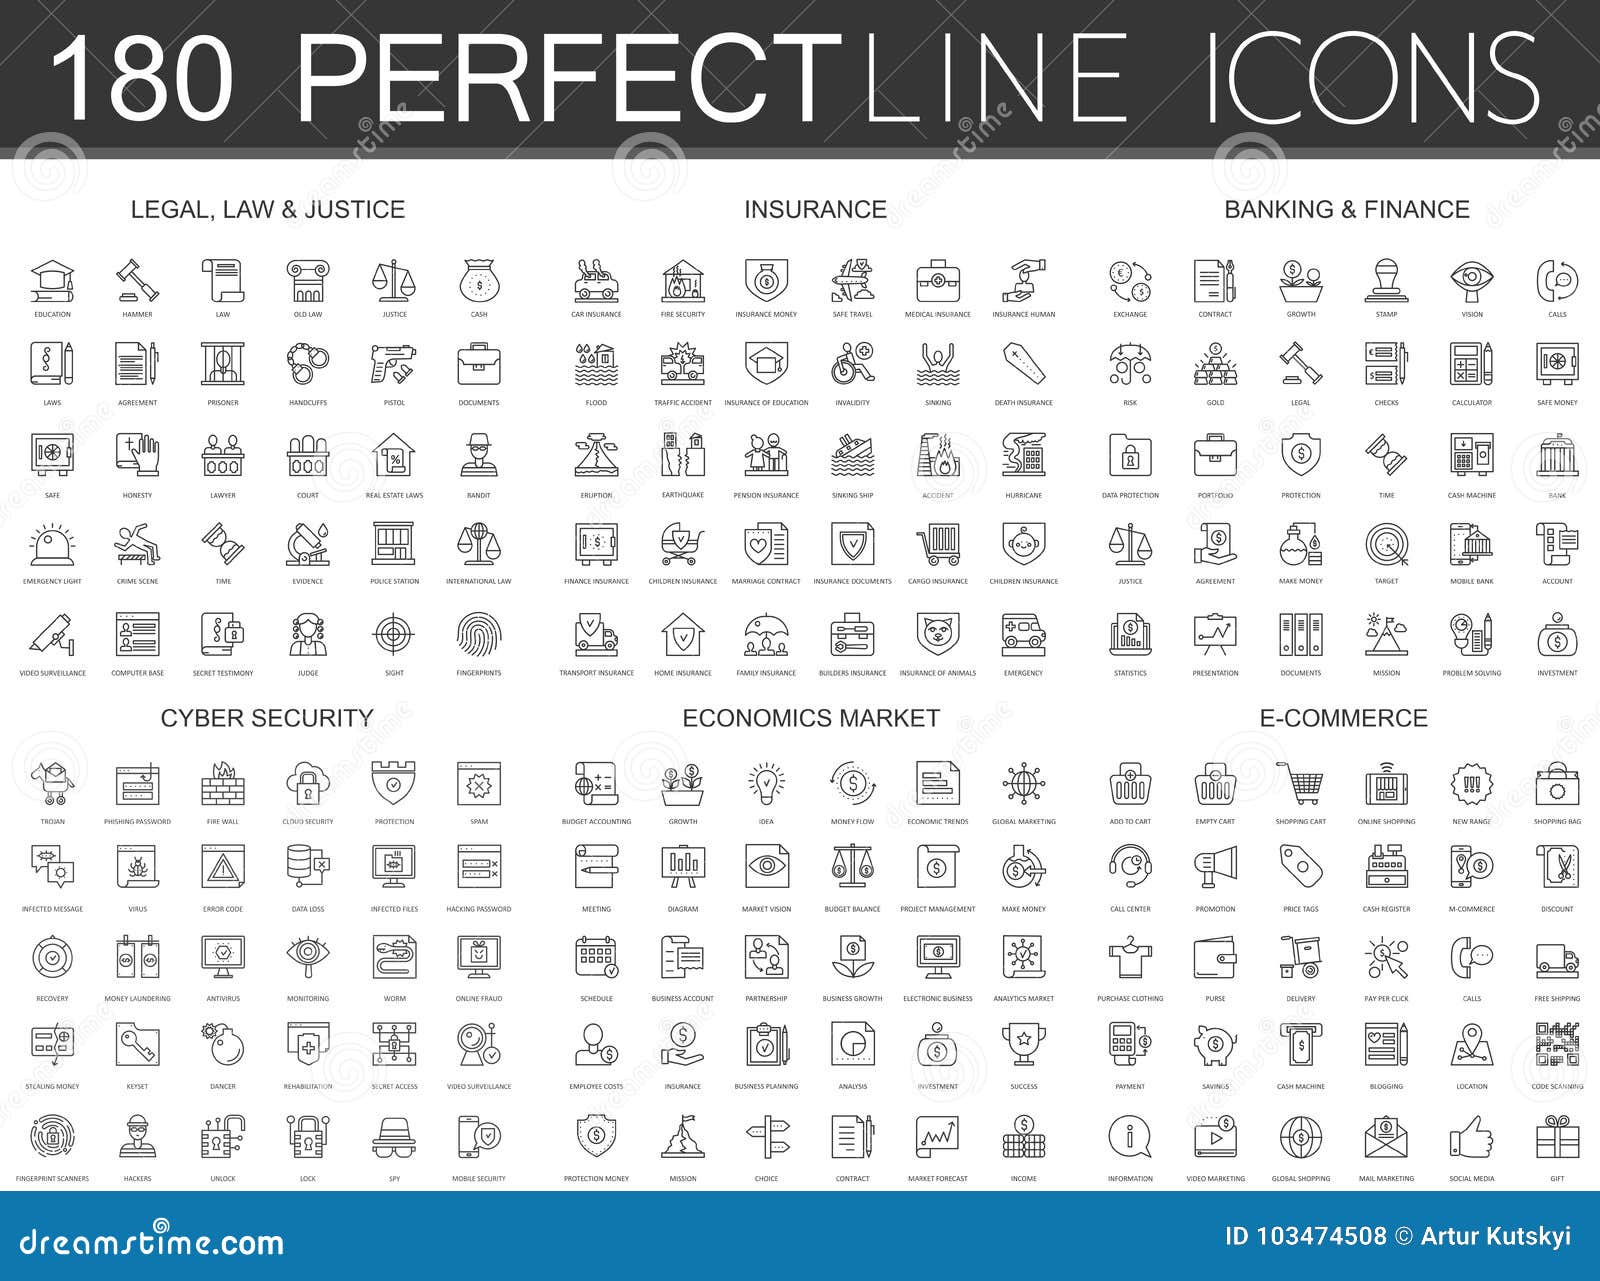 180 modern thin line icons set of legal, law and justice, insurance, banking finance, cyber security, economics market